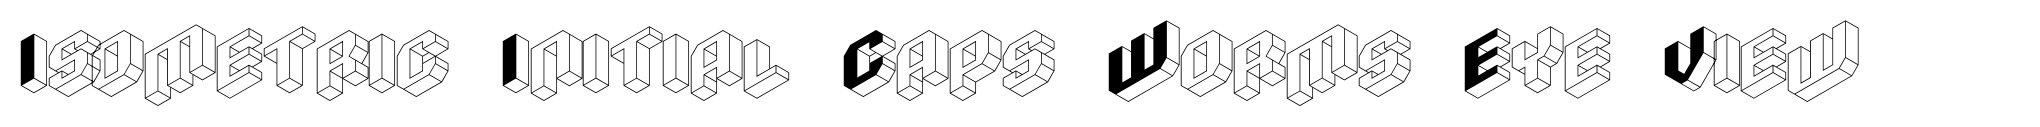 Isometric Initial Caps Worms Eye View image